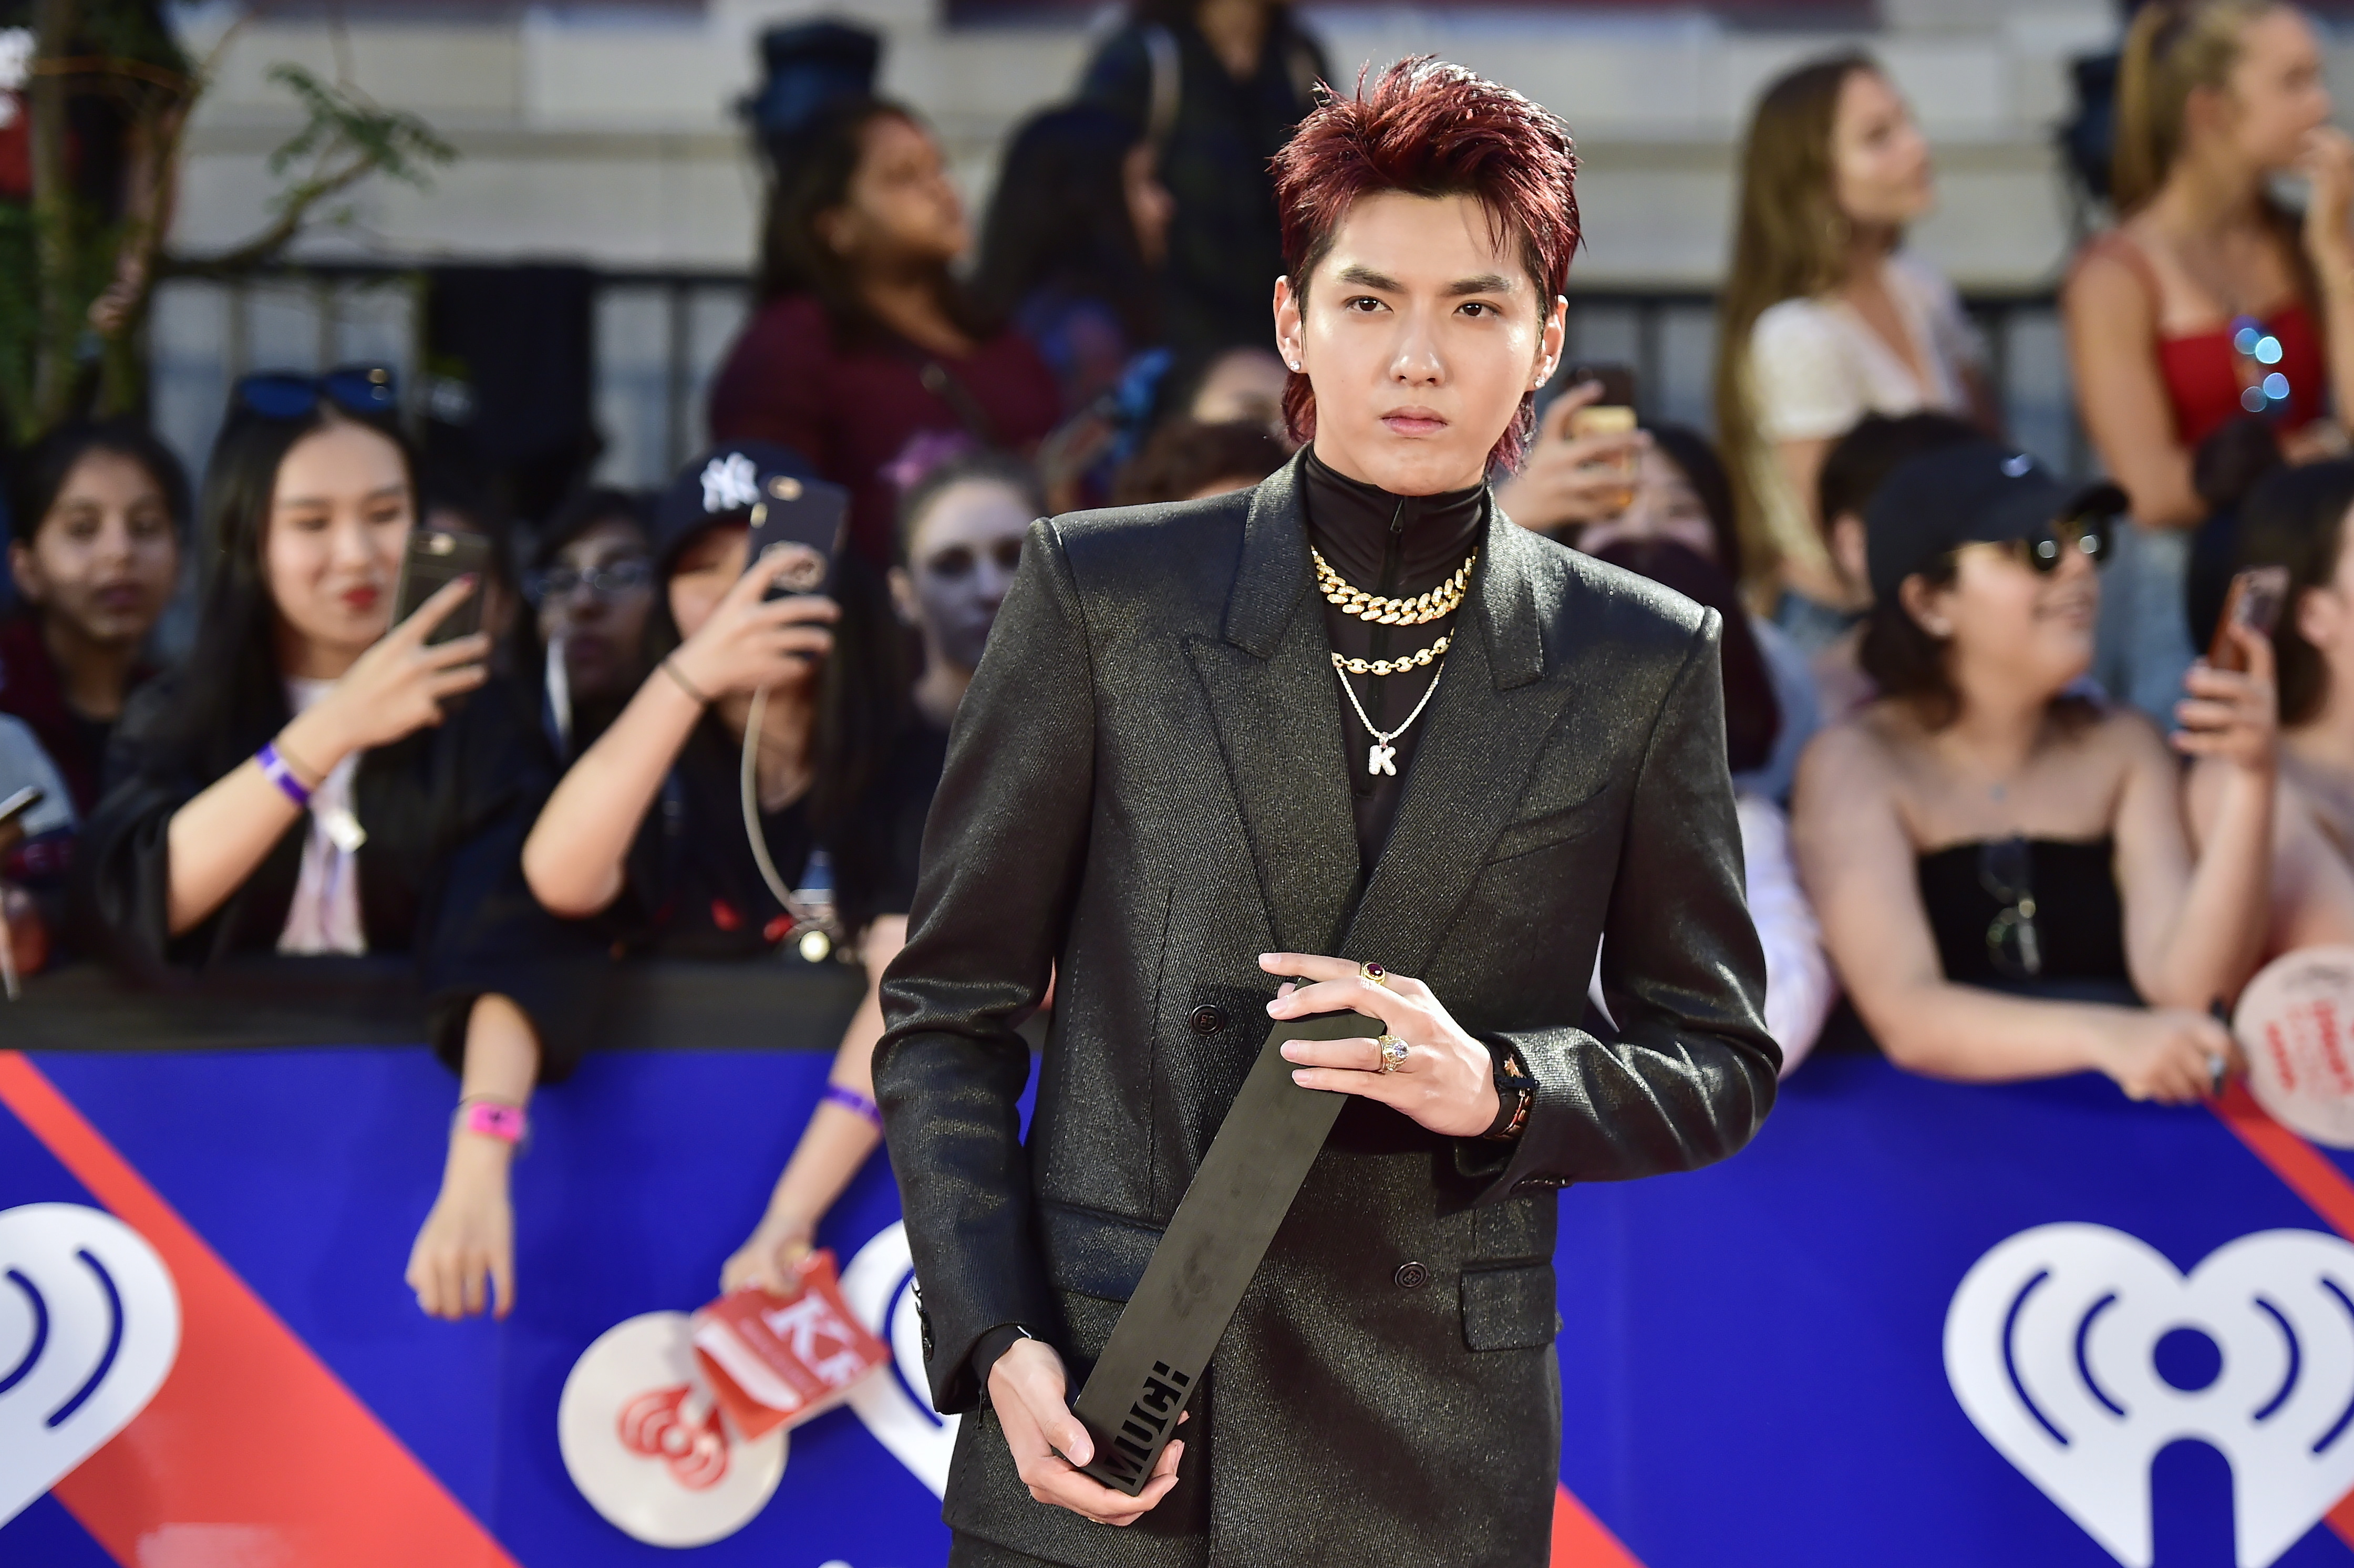 Chinese-Canadian actor, rapper, singer, record producer, and model Kris Wu  attends an activity of anti-dandruff shampoo brand CLEAR, dressing in black  suit, Shanghai, China, June 10 2020. (Photo by Stringer/ChinaImages/Sipa  USA Stock